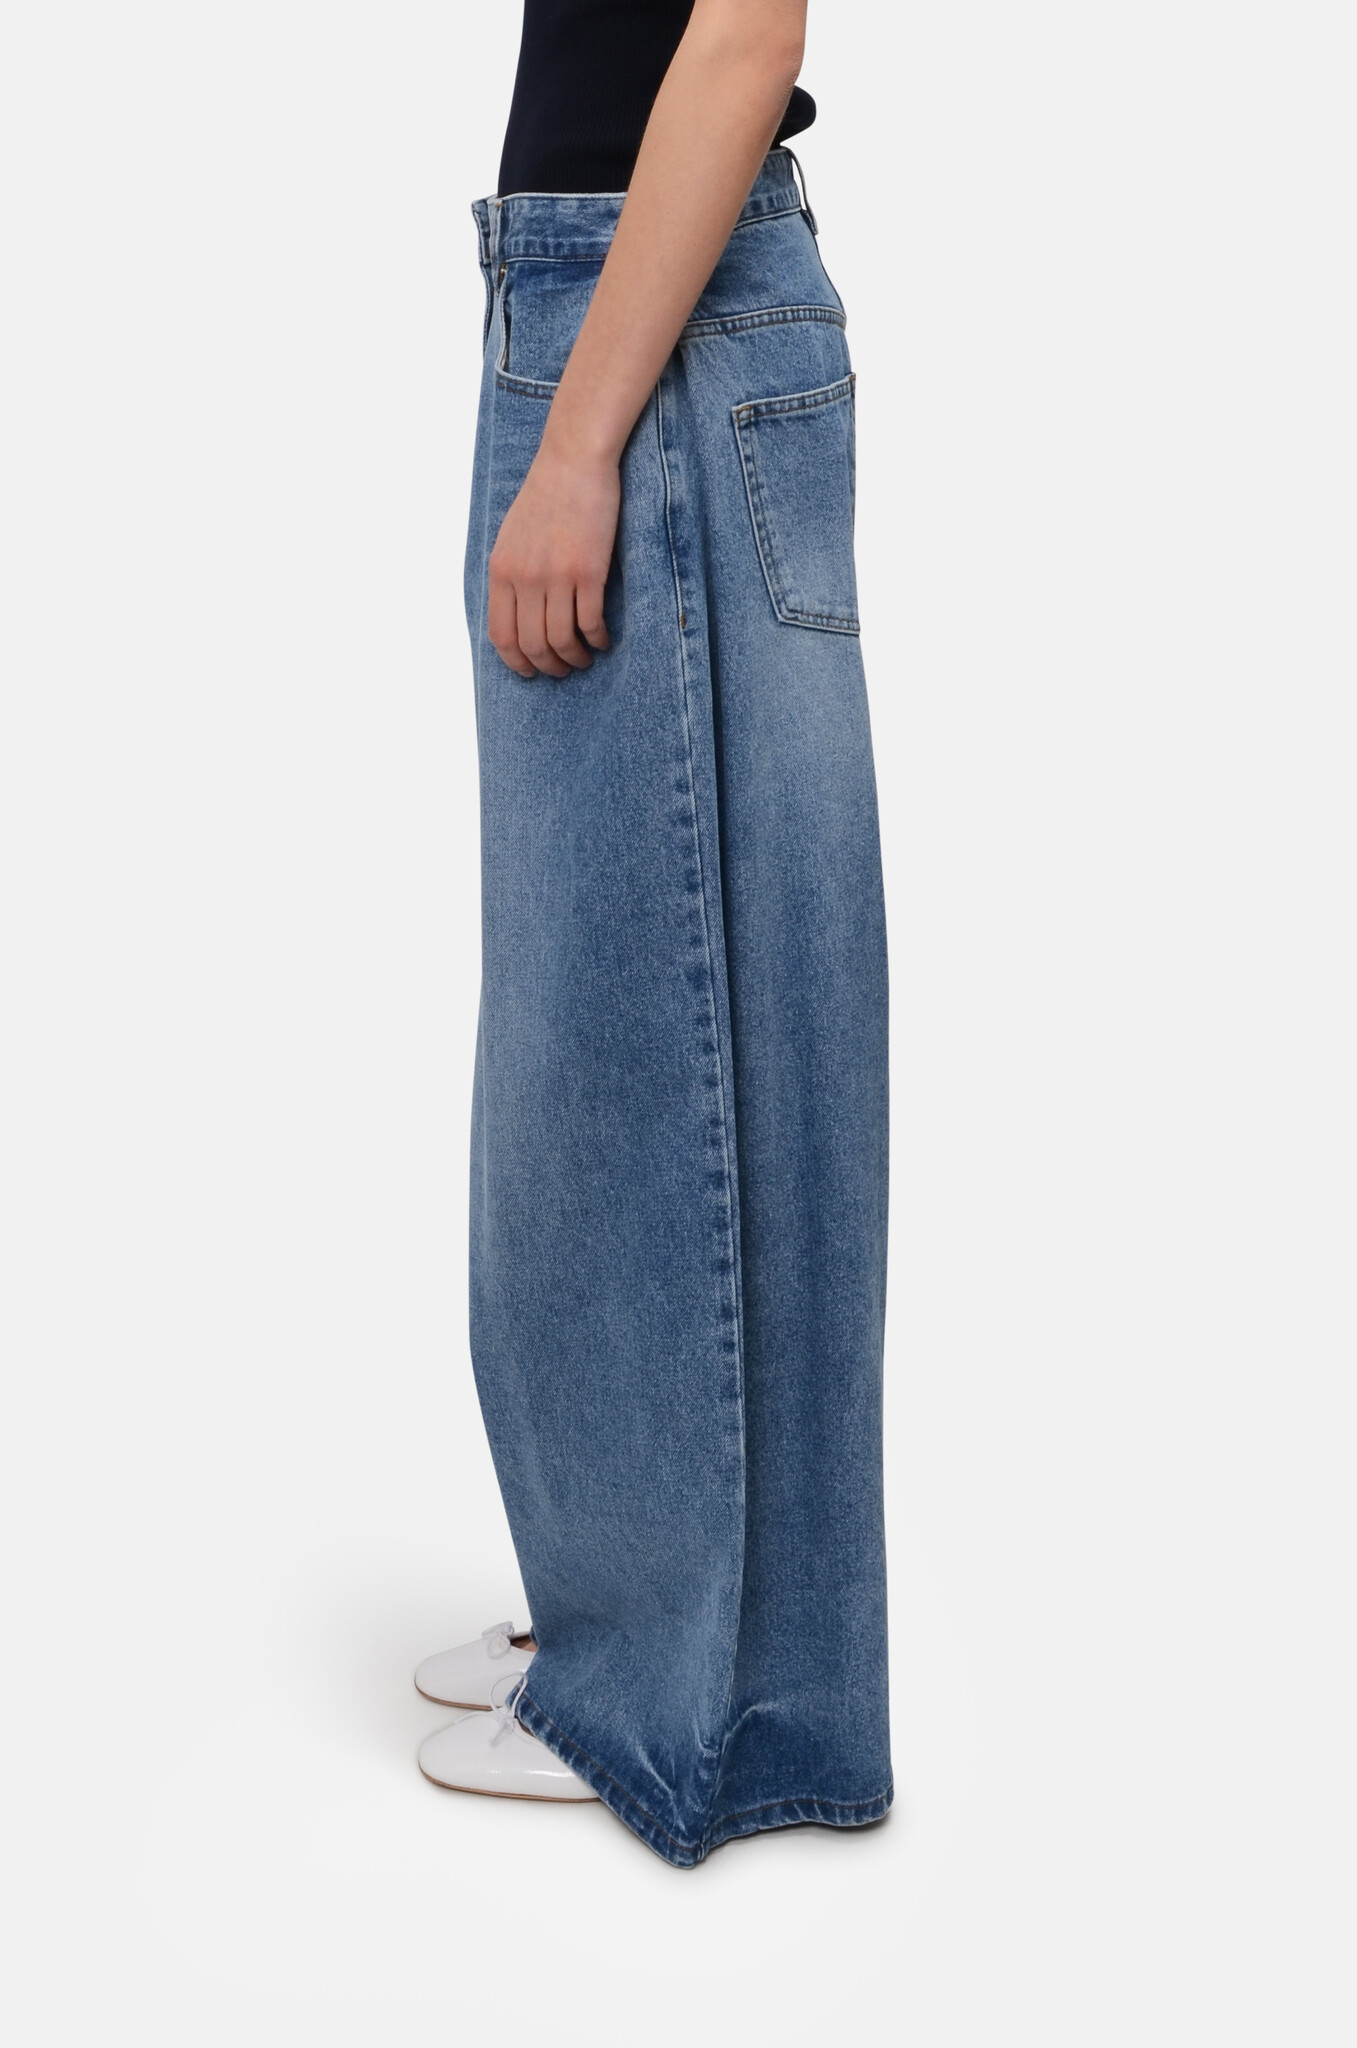 Double Tucked Jeans in Smoke Blue-3